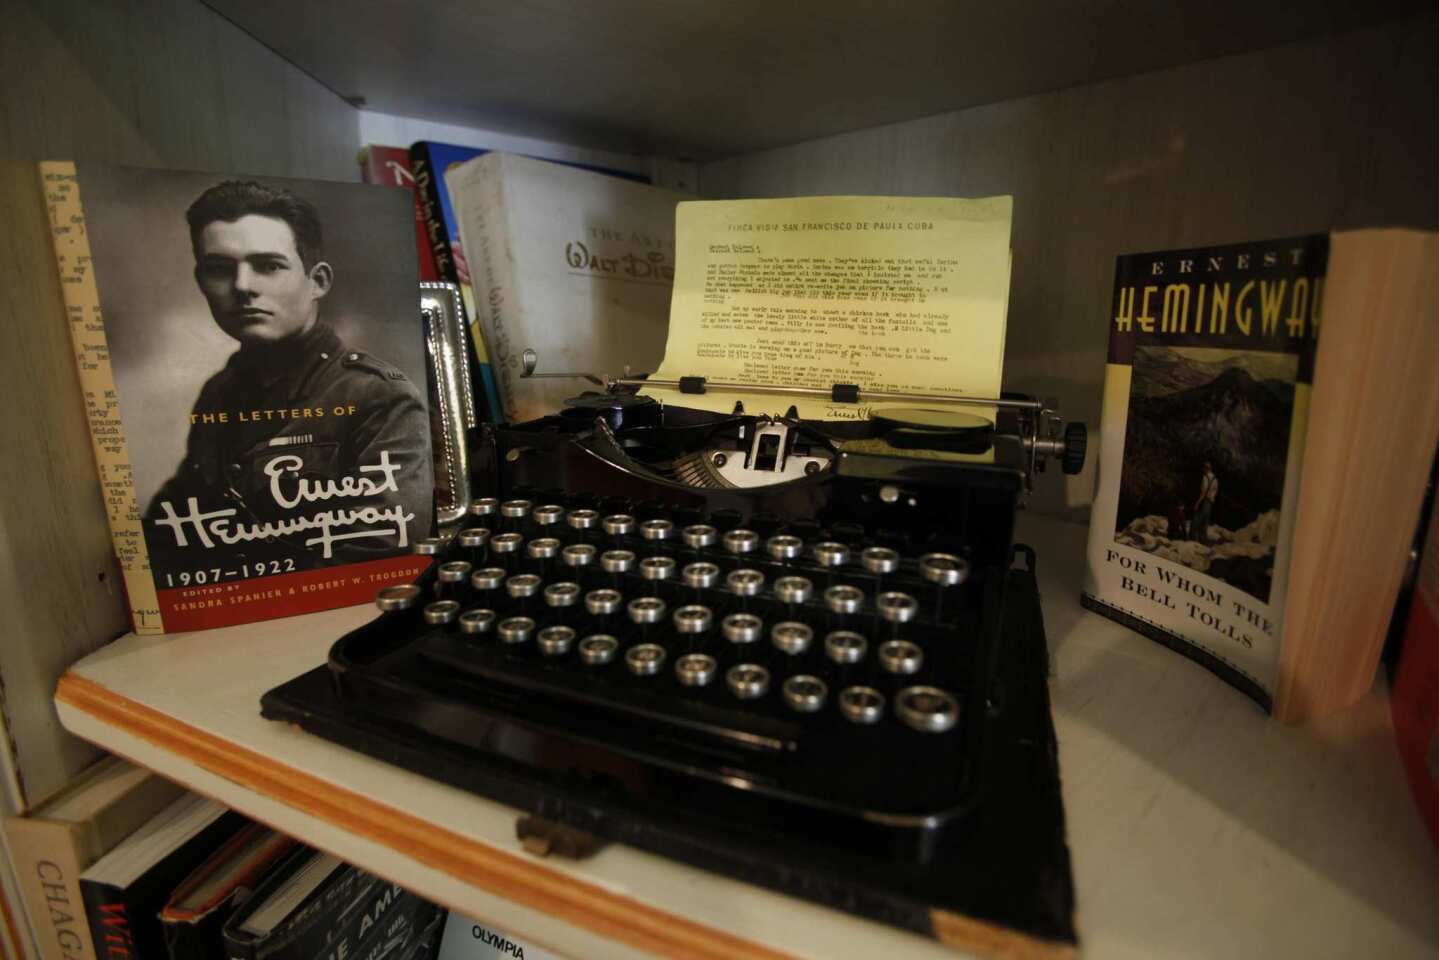 Steve Soboroff, the investor and civic leader, has a not-so-secret passion for typewriters. As part of his collection, Soboroff ownes this machine once owned by Ernest Hemmingway.